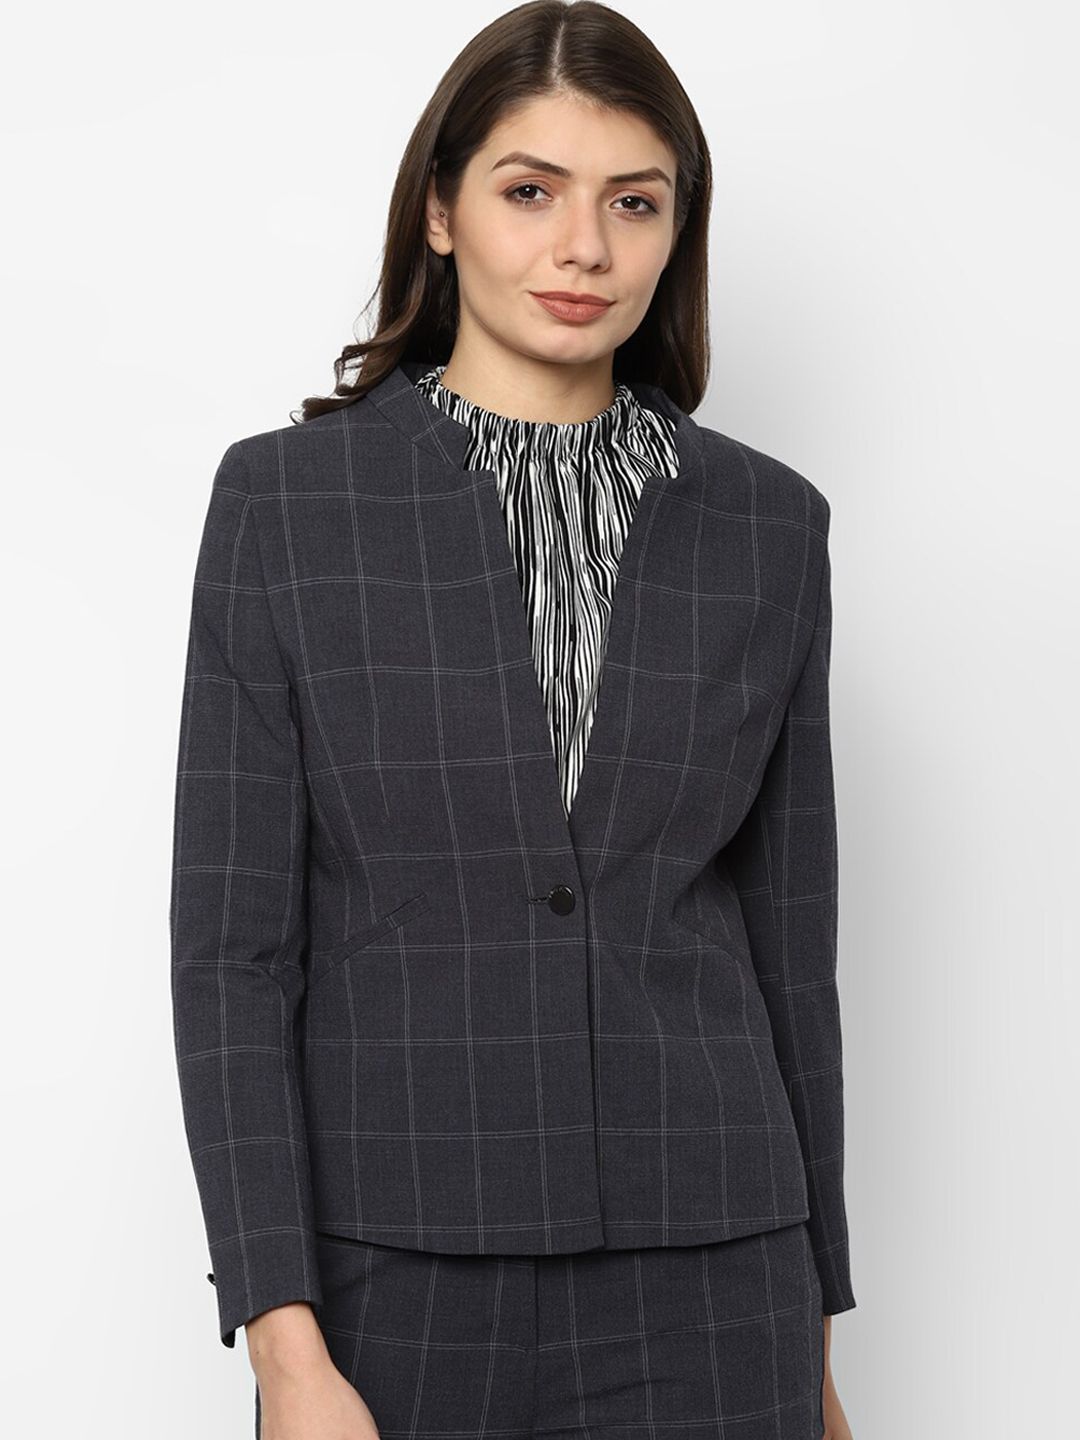 Allen Solly Woman Women Grey Checked Single-Breasted Blazer Price in India